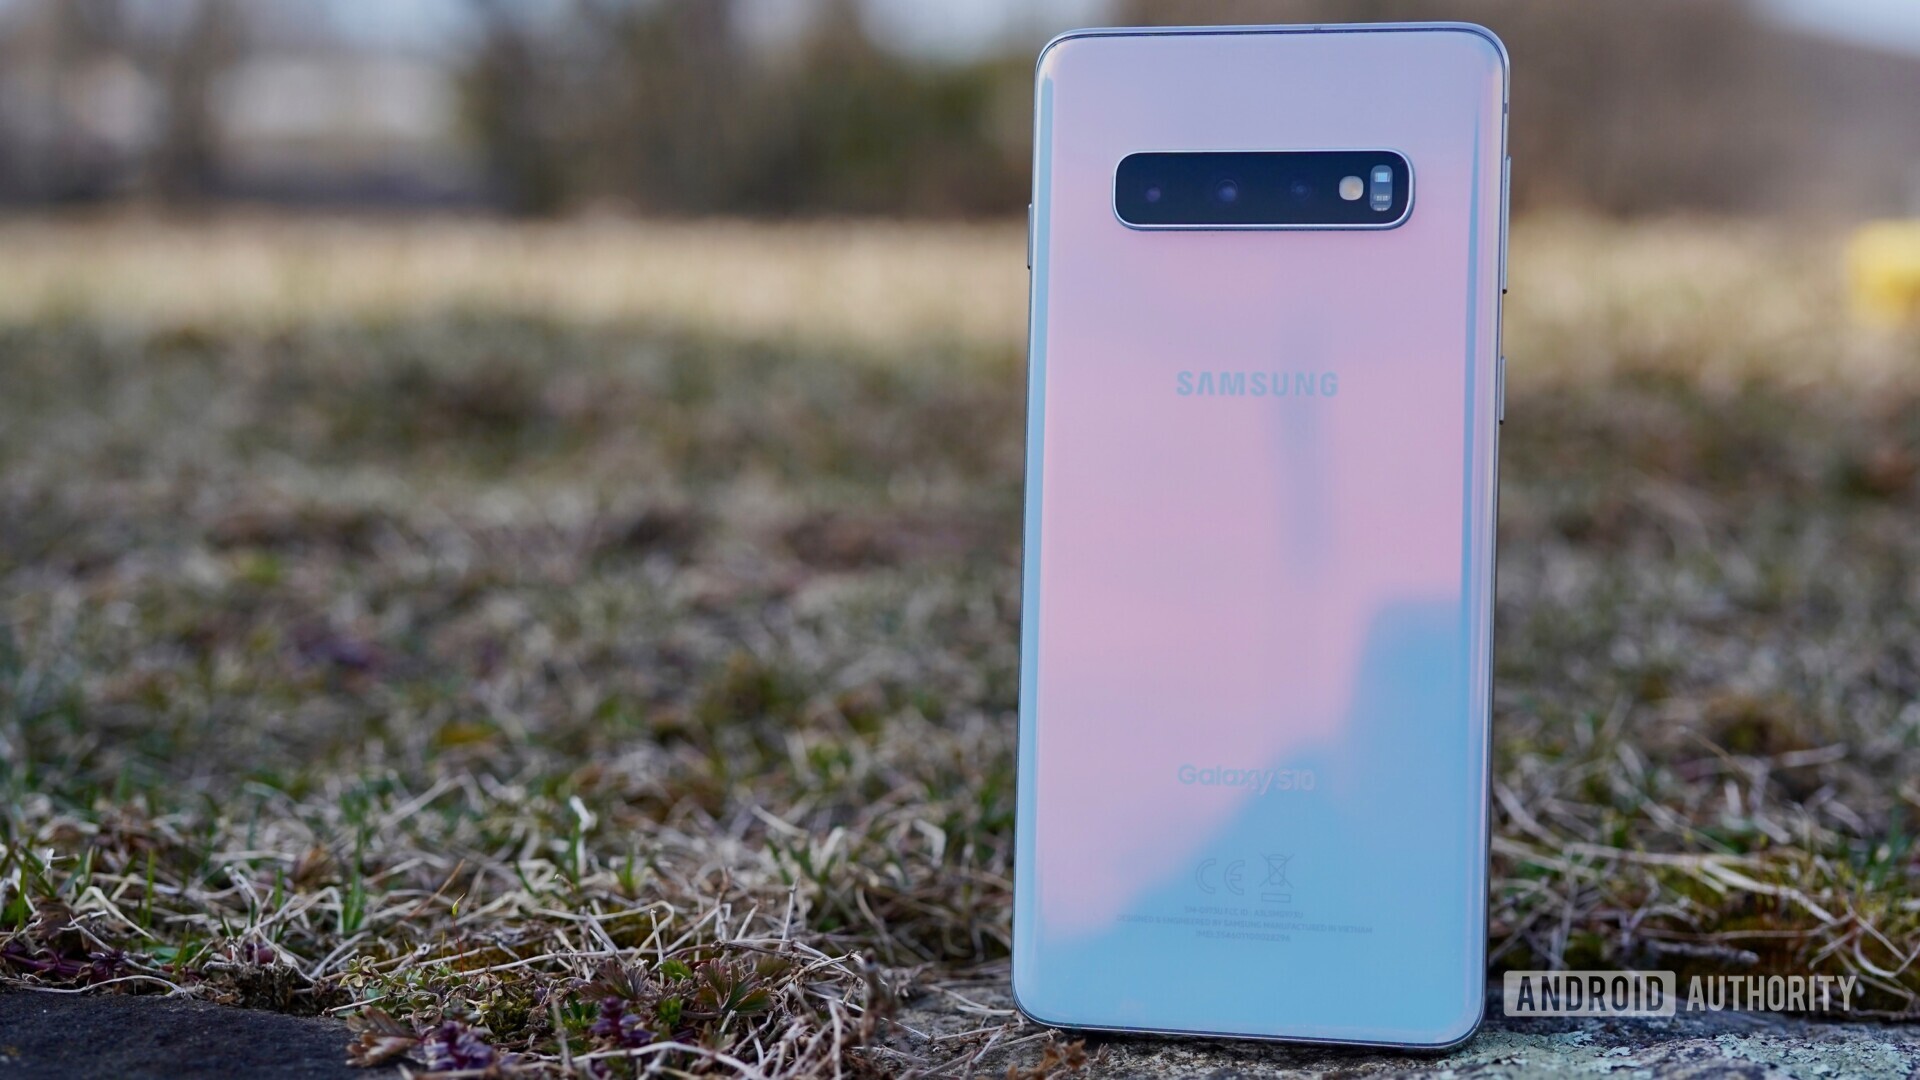 Outdoor photo of the back side of a Samsung Galaxy S10 in white prism color, standing upright on grass.